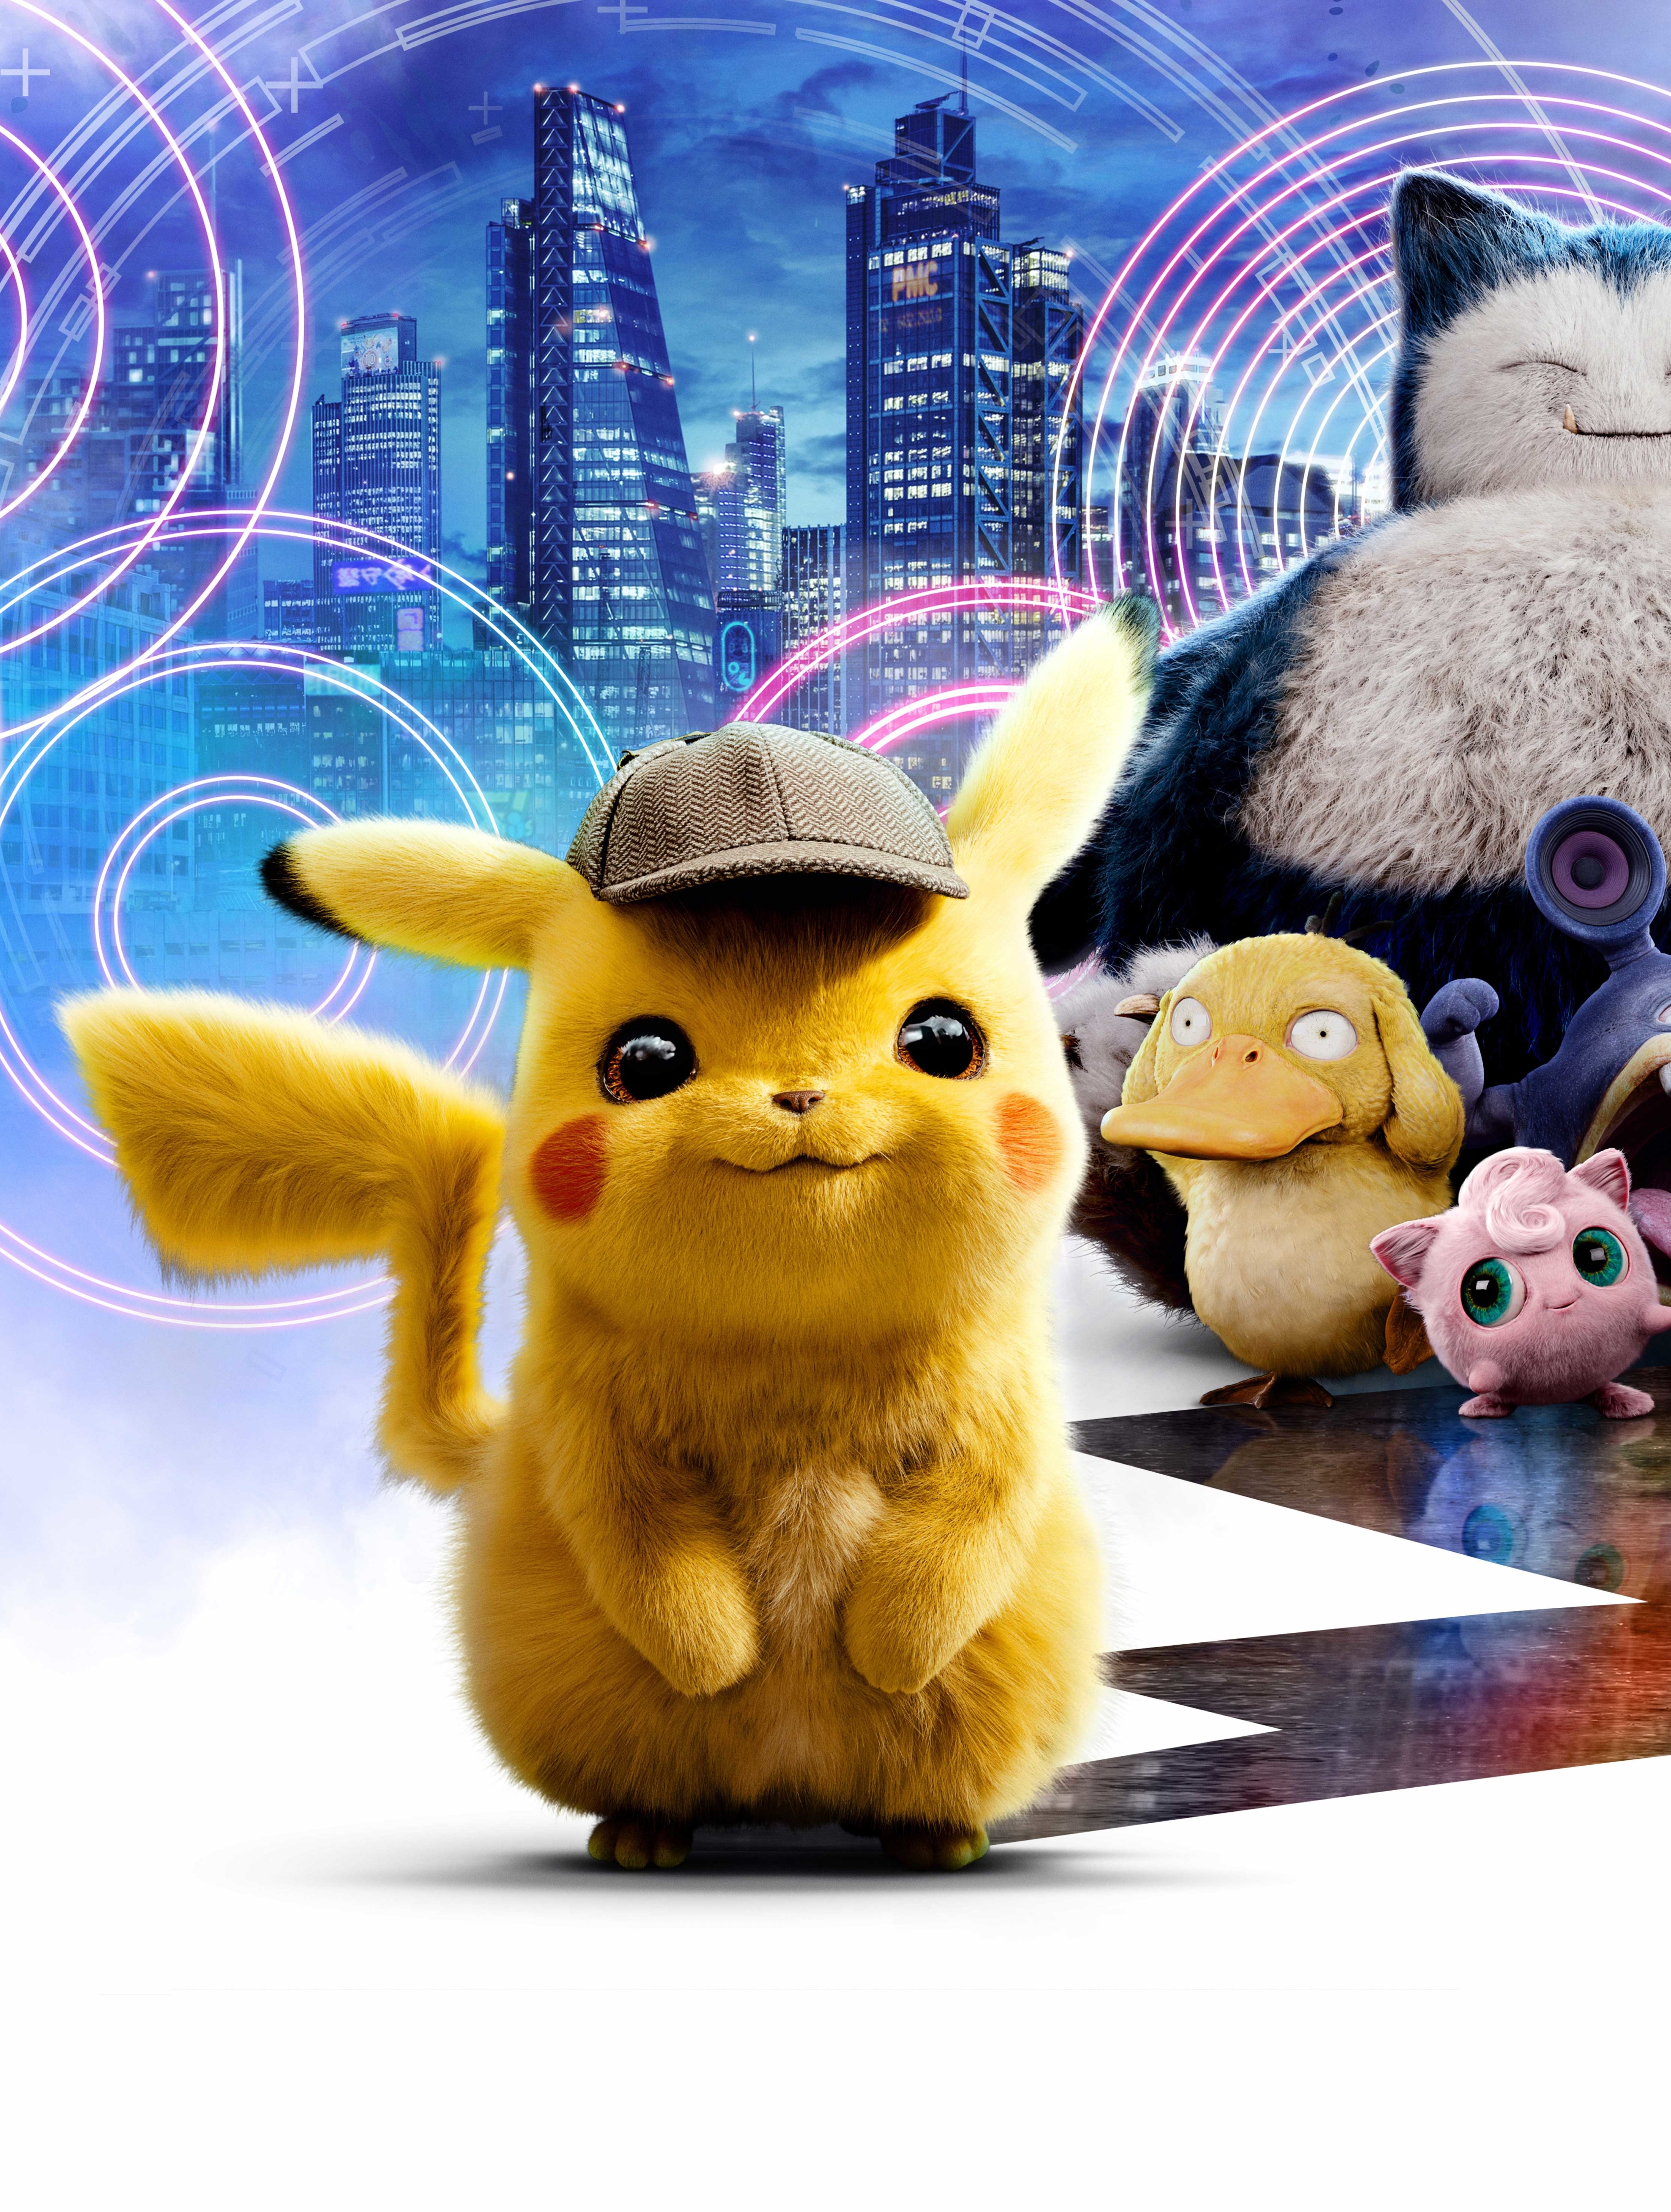 30 Pokémon Detective Pikachu HD Wallpapers and Backgrounds